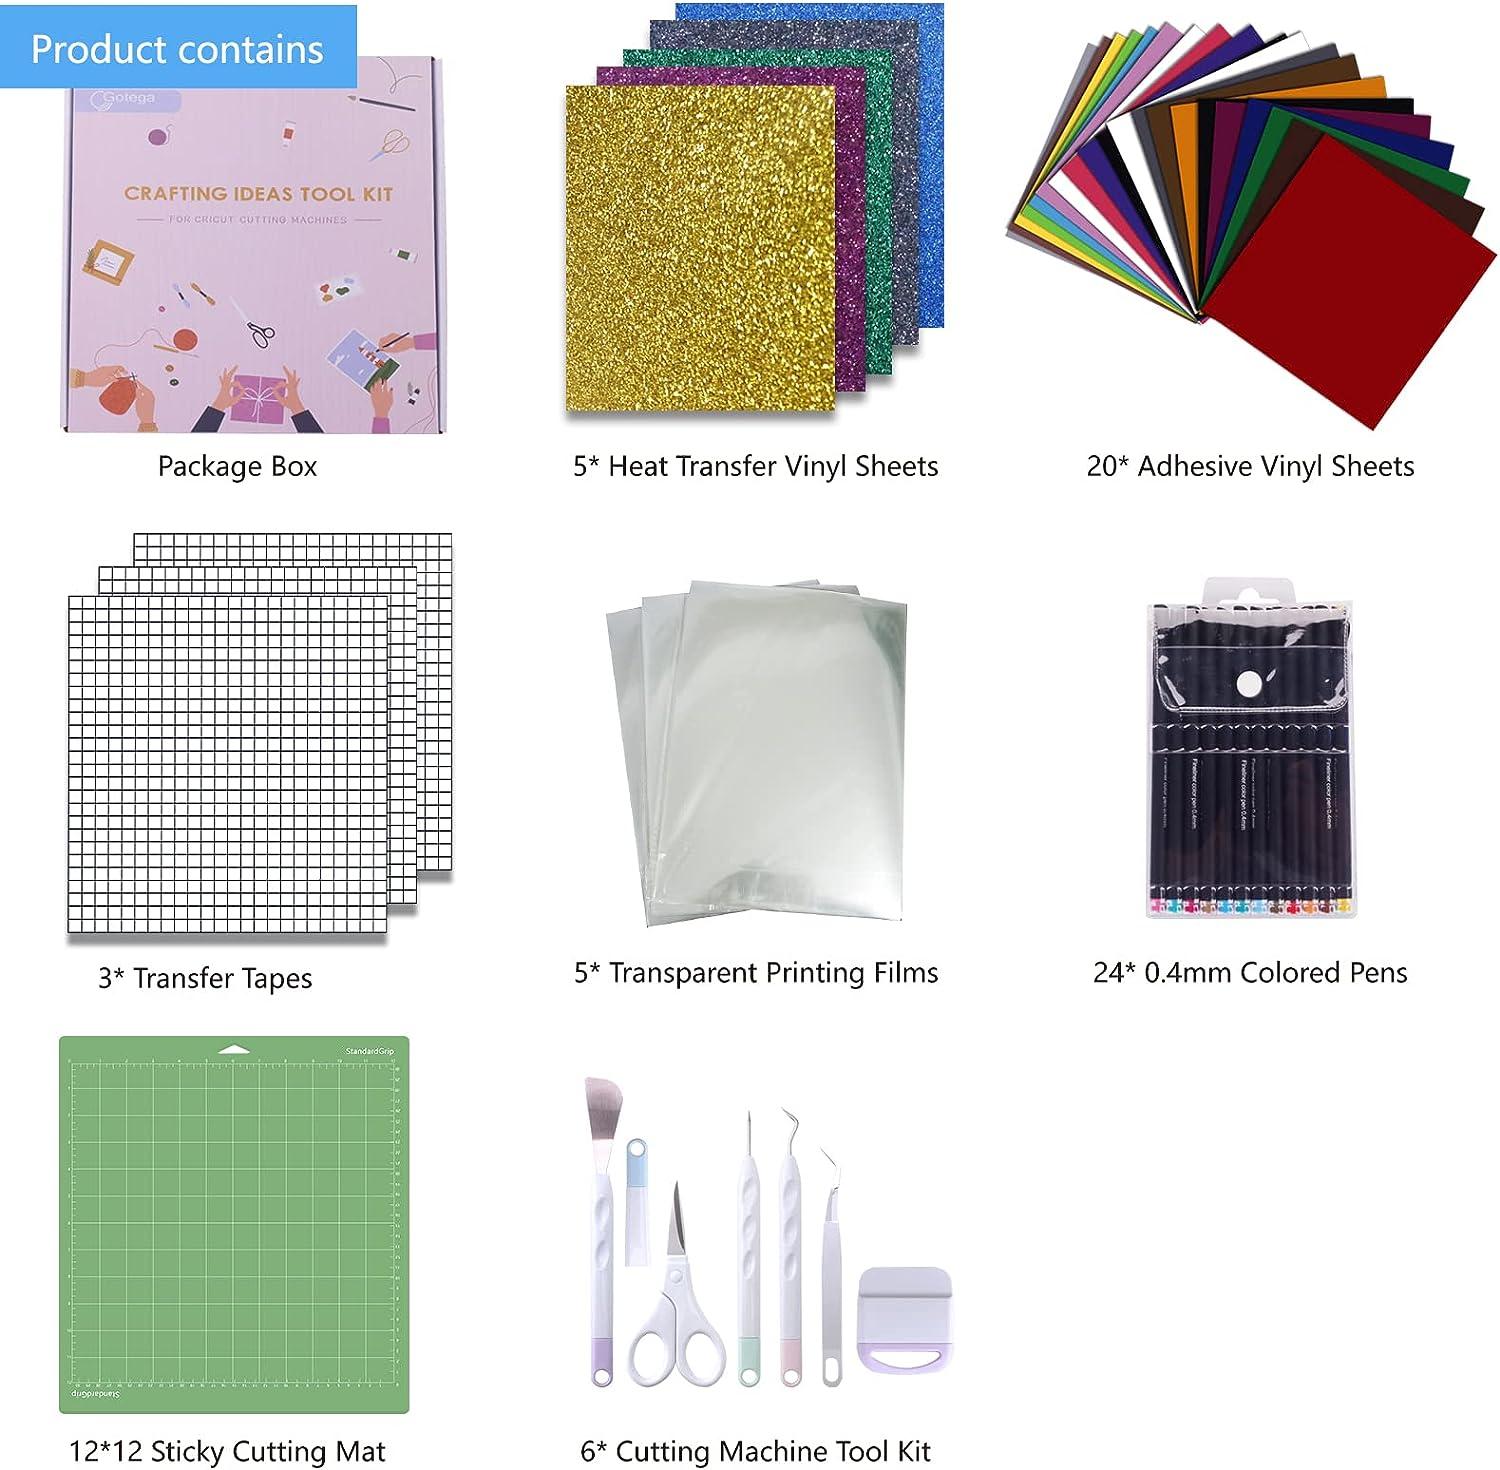 Cricut Basic Tool Set: Handheld Essentials for Every Crafter